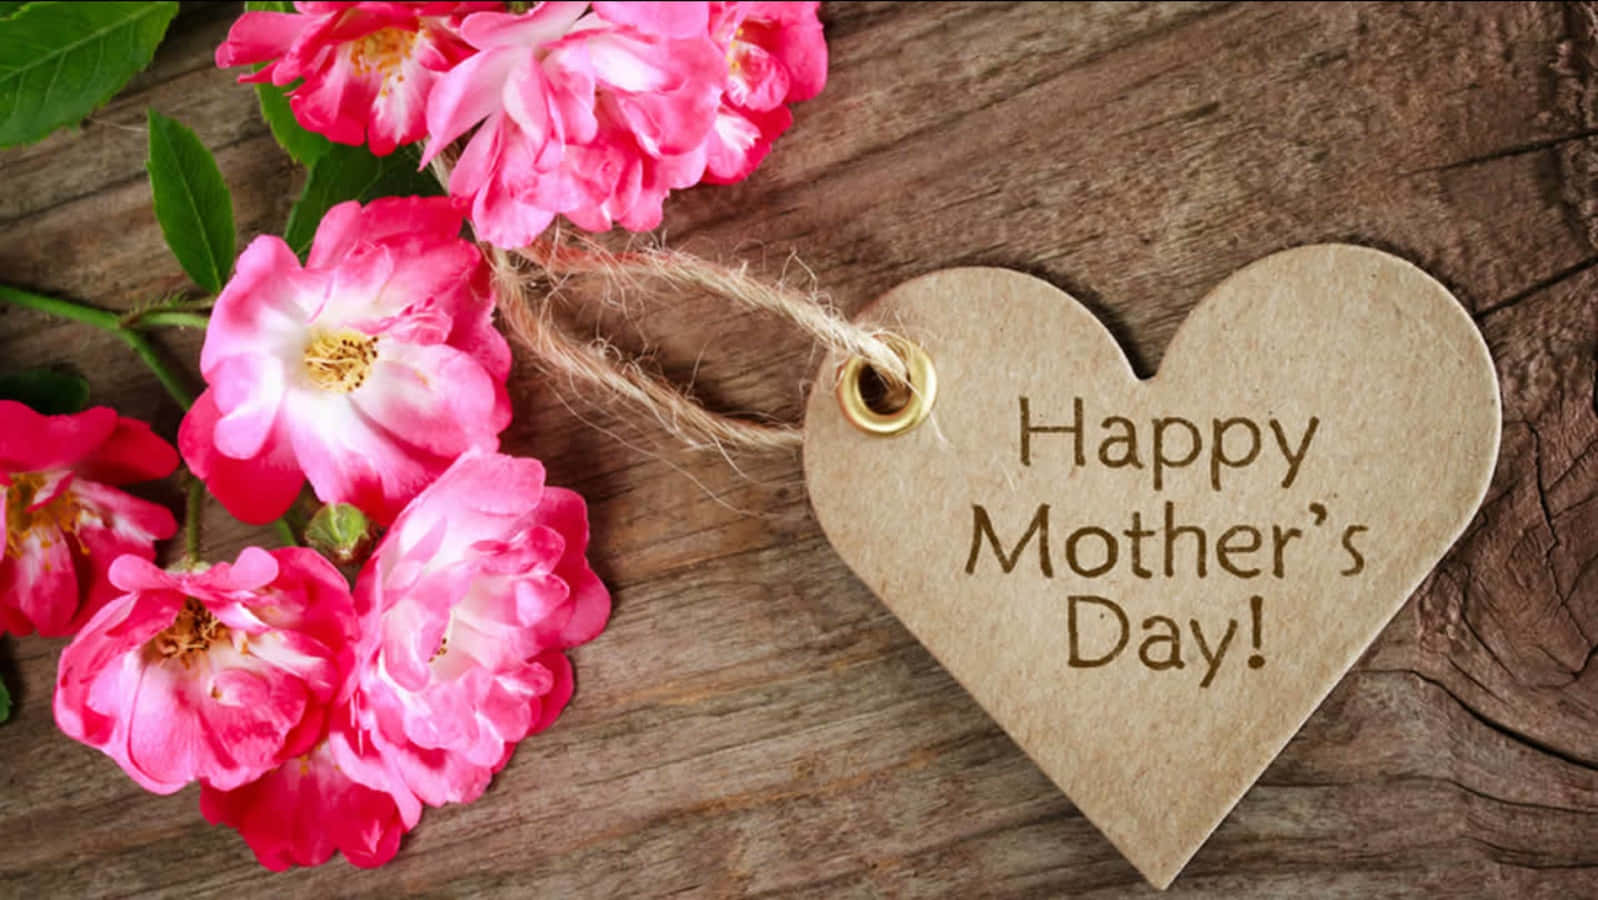 Celebrate this Happy Mothers Day by sending your love and wishes to the special woman in your life.